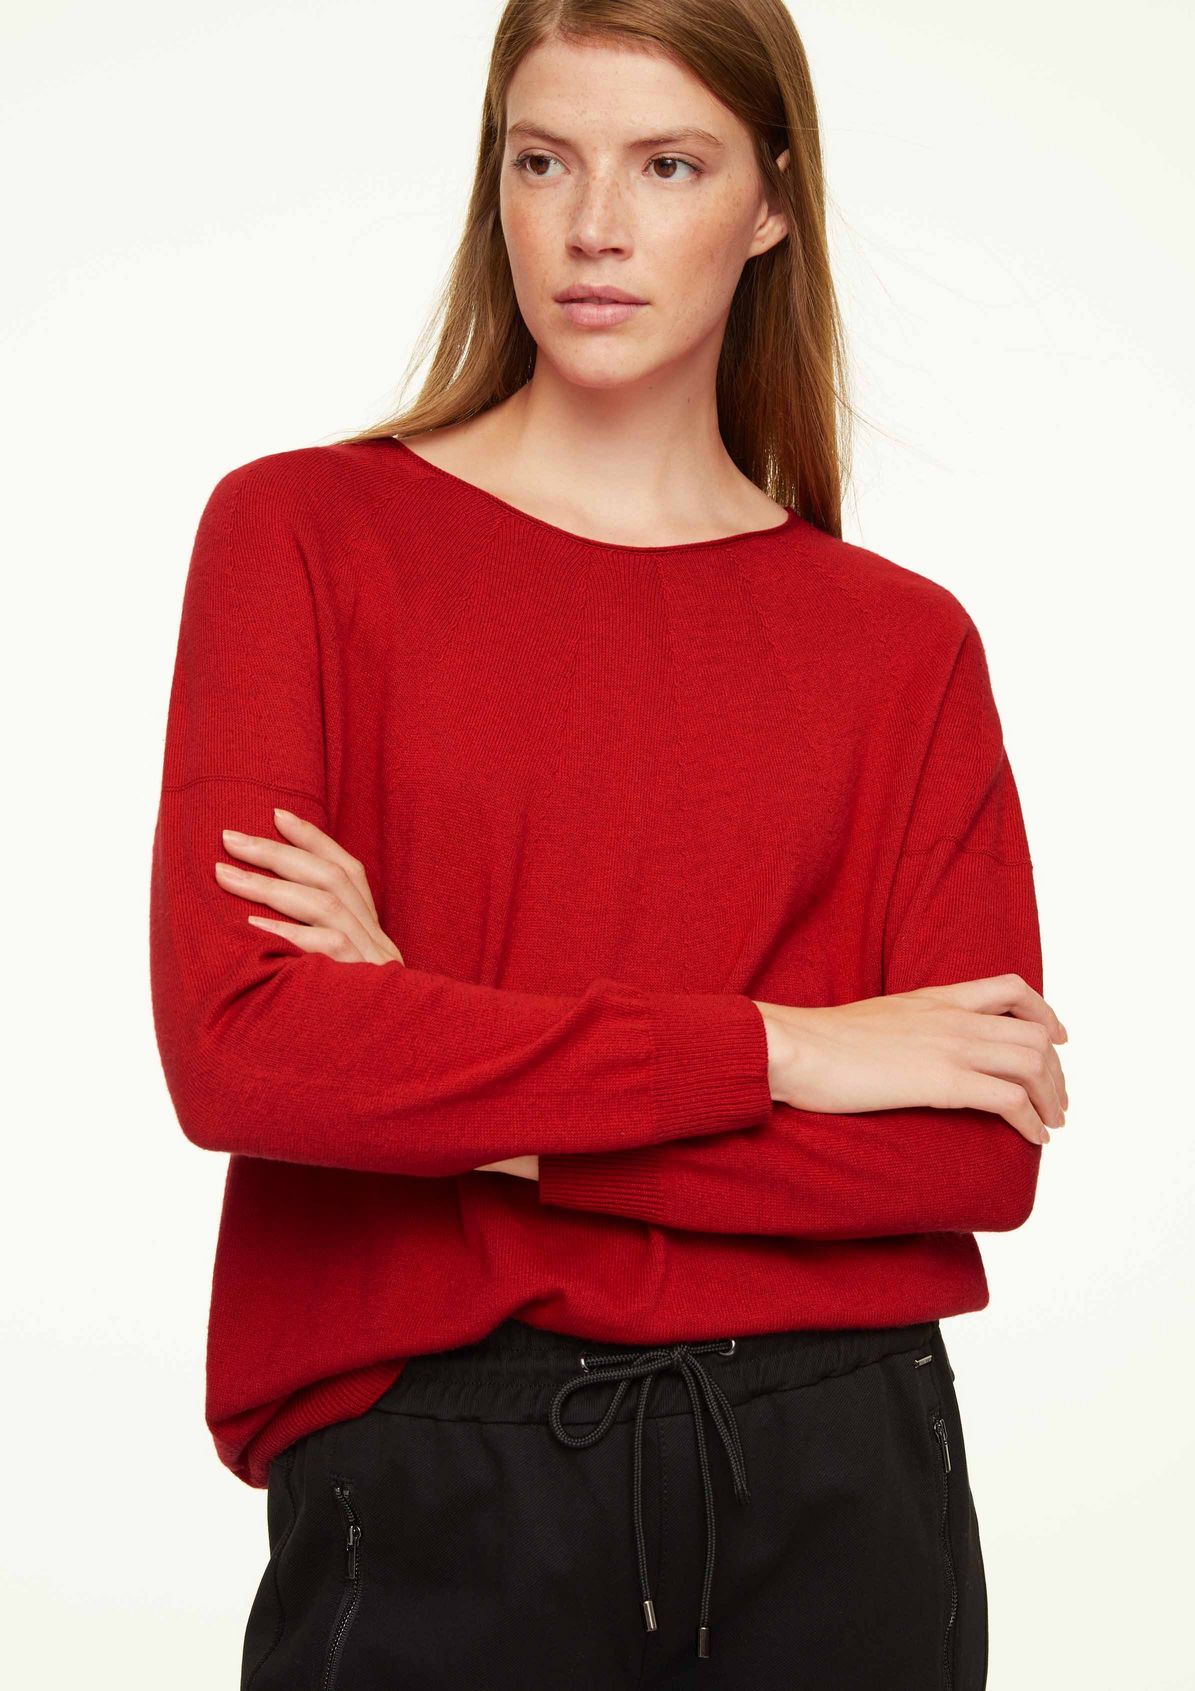 Soft jumper with percentage of wool from comma